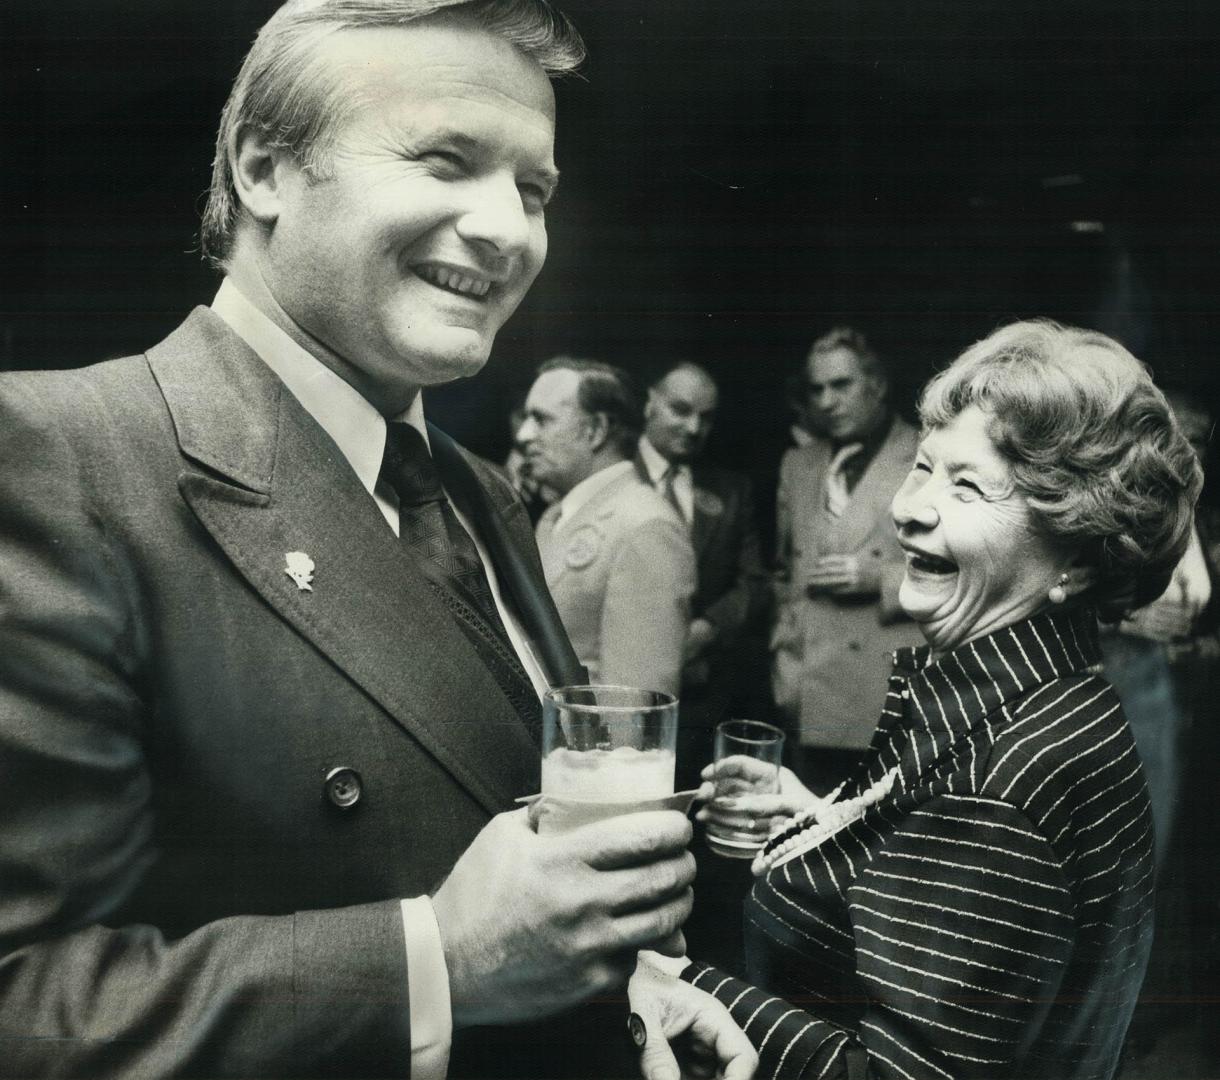 Kicking off a hectic week of campaiging, Premier William Davis shares a joke with Rita Myers at a fund-raising dinner inToronto's Prince Hotel last Mo(...)